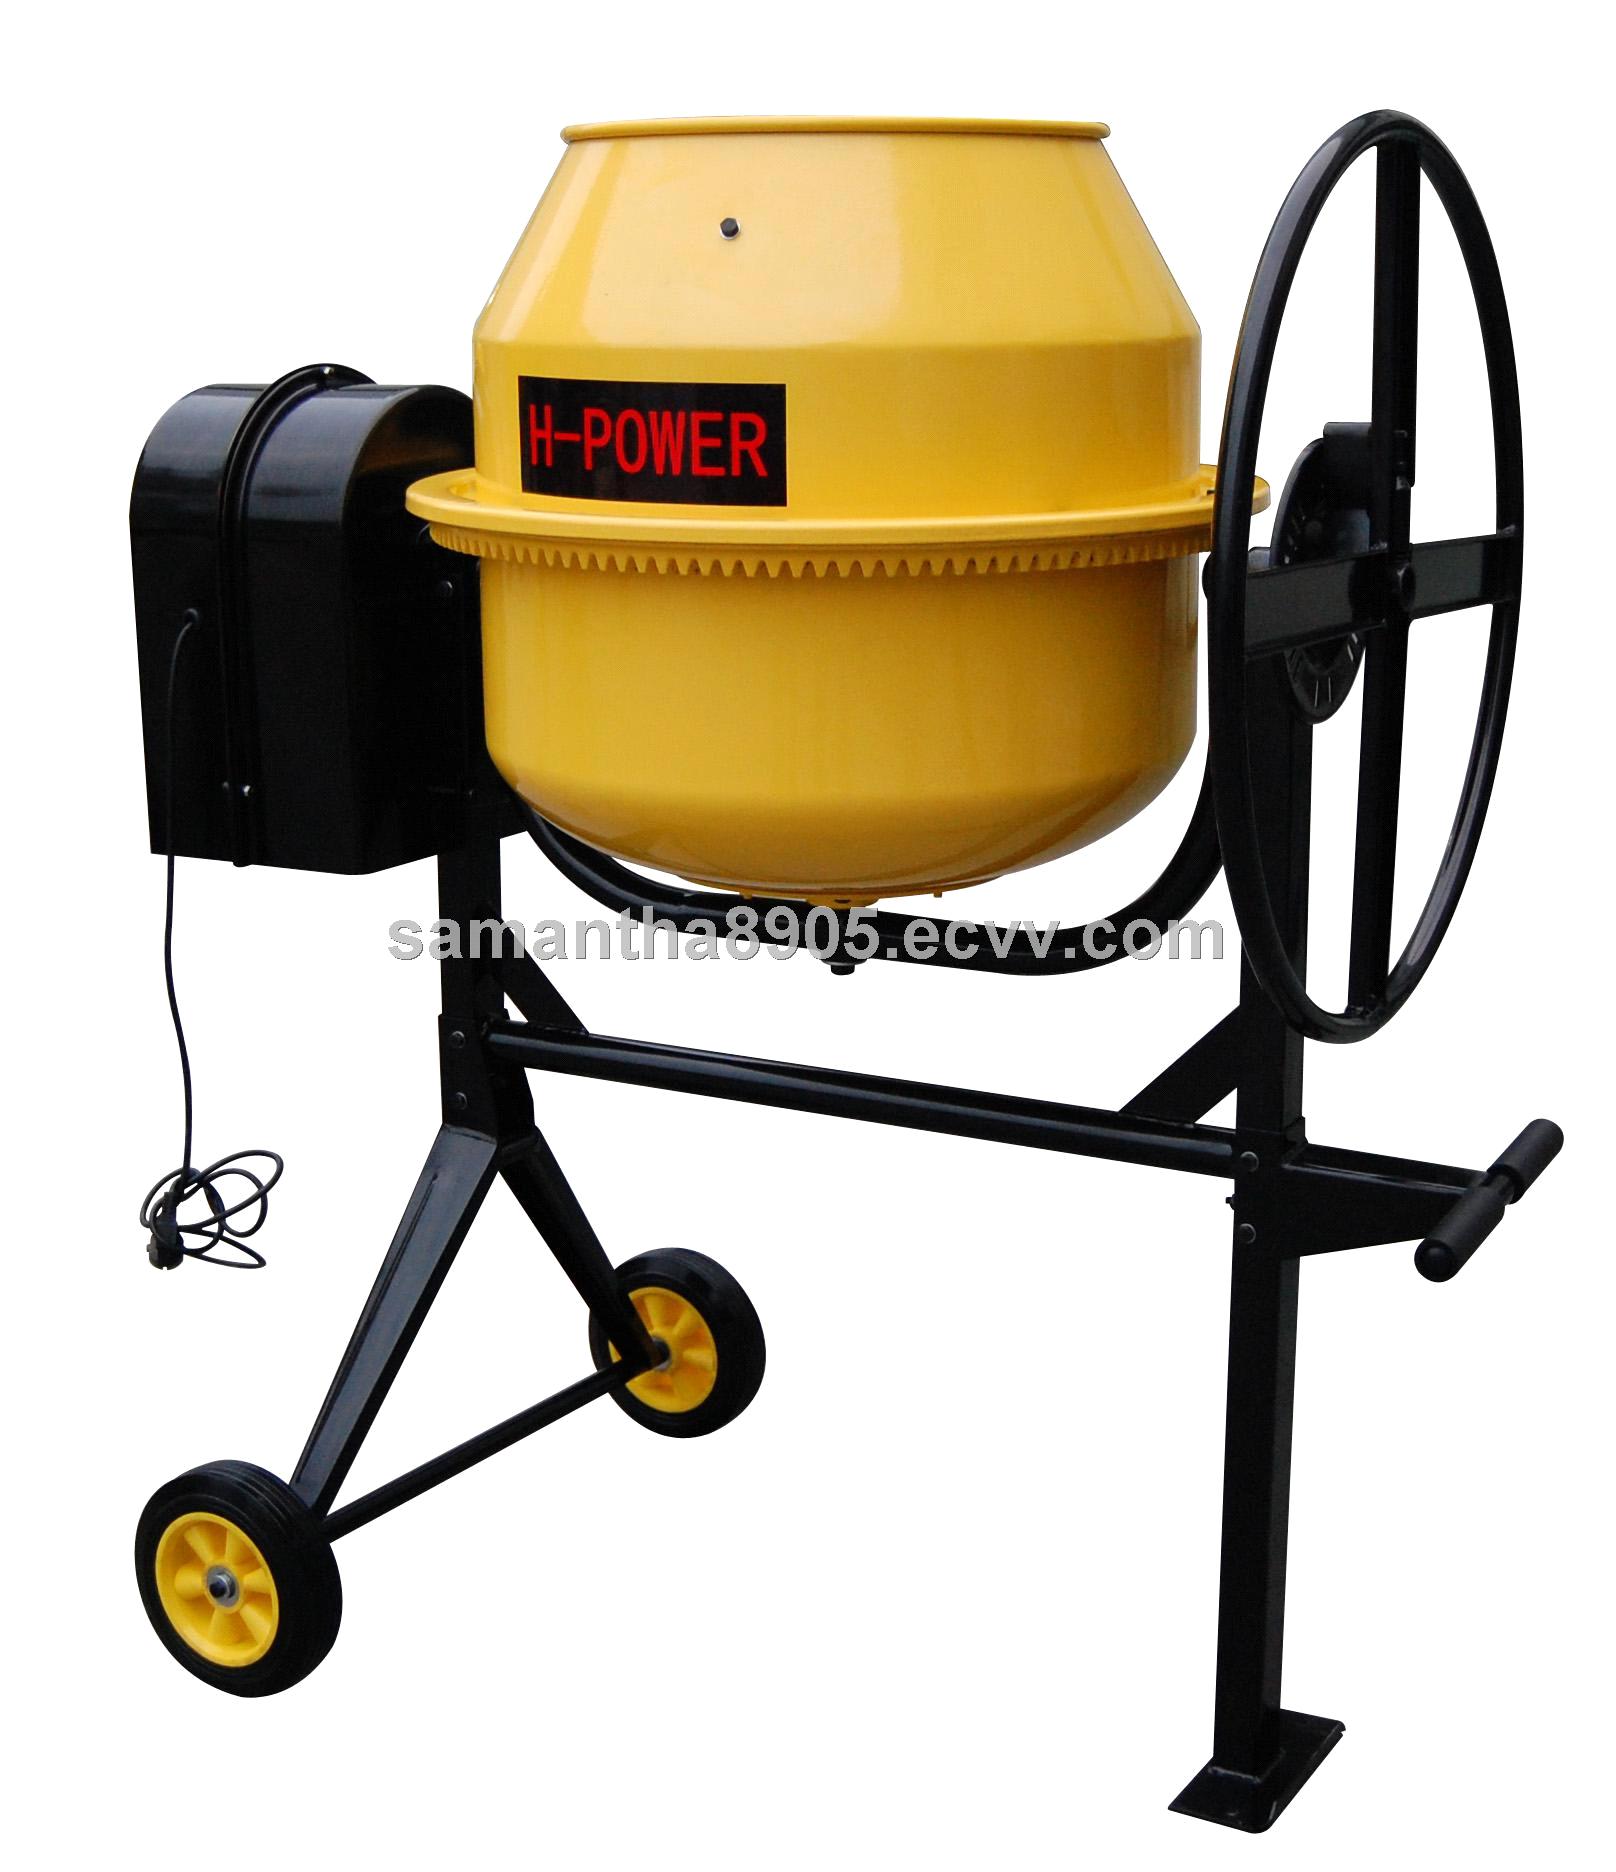 Concrete Mixer with MOTOR with CE